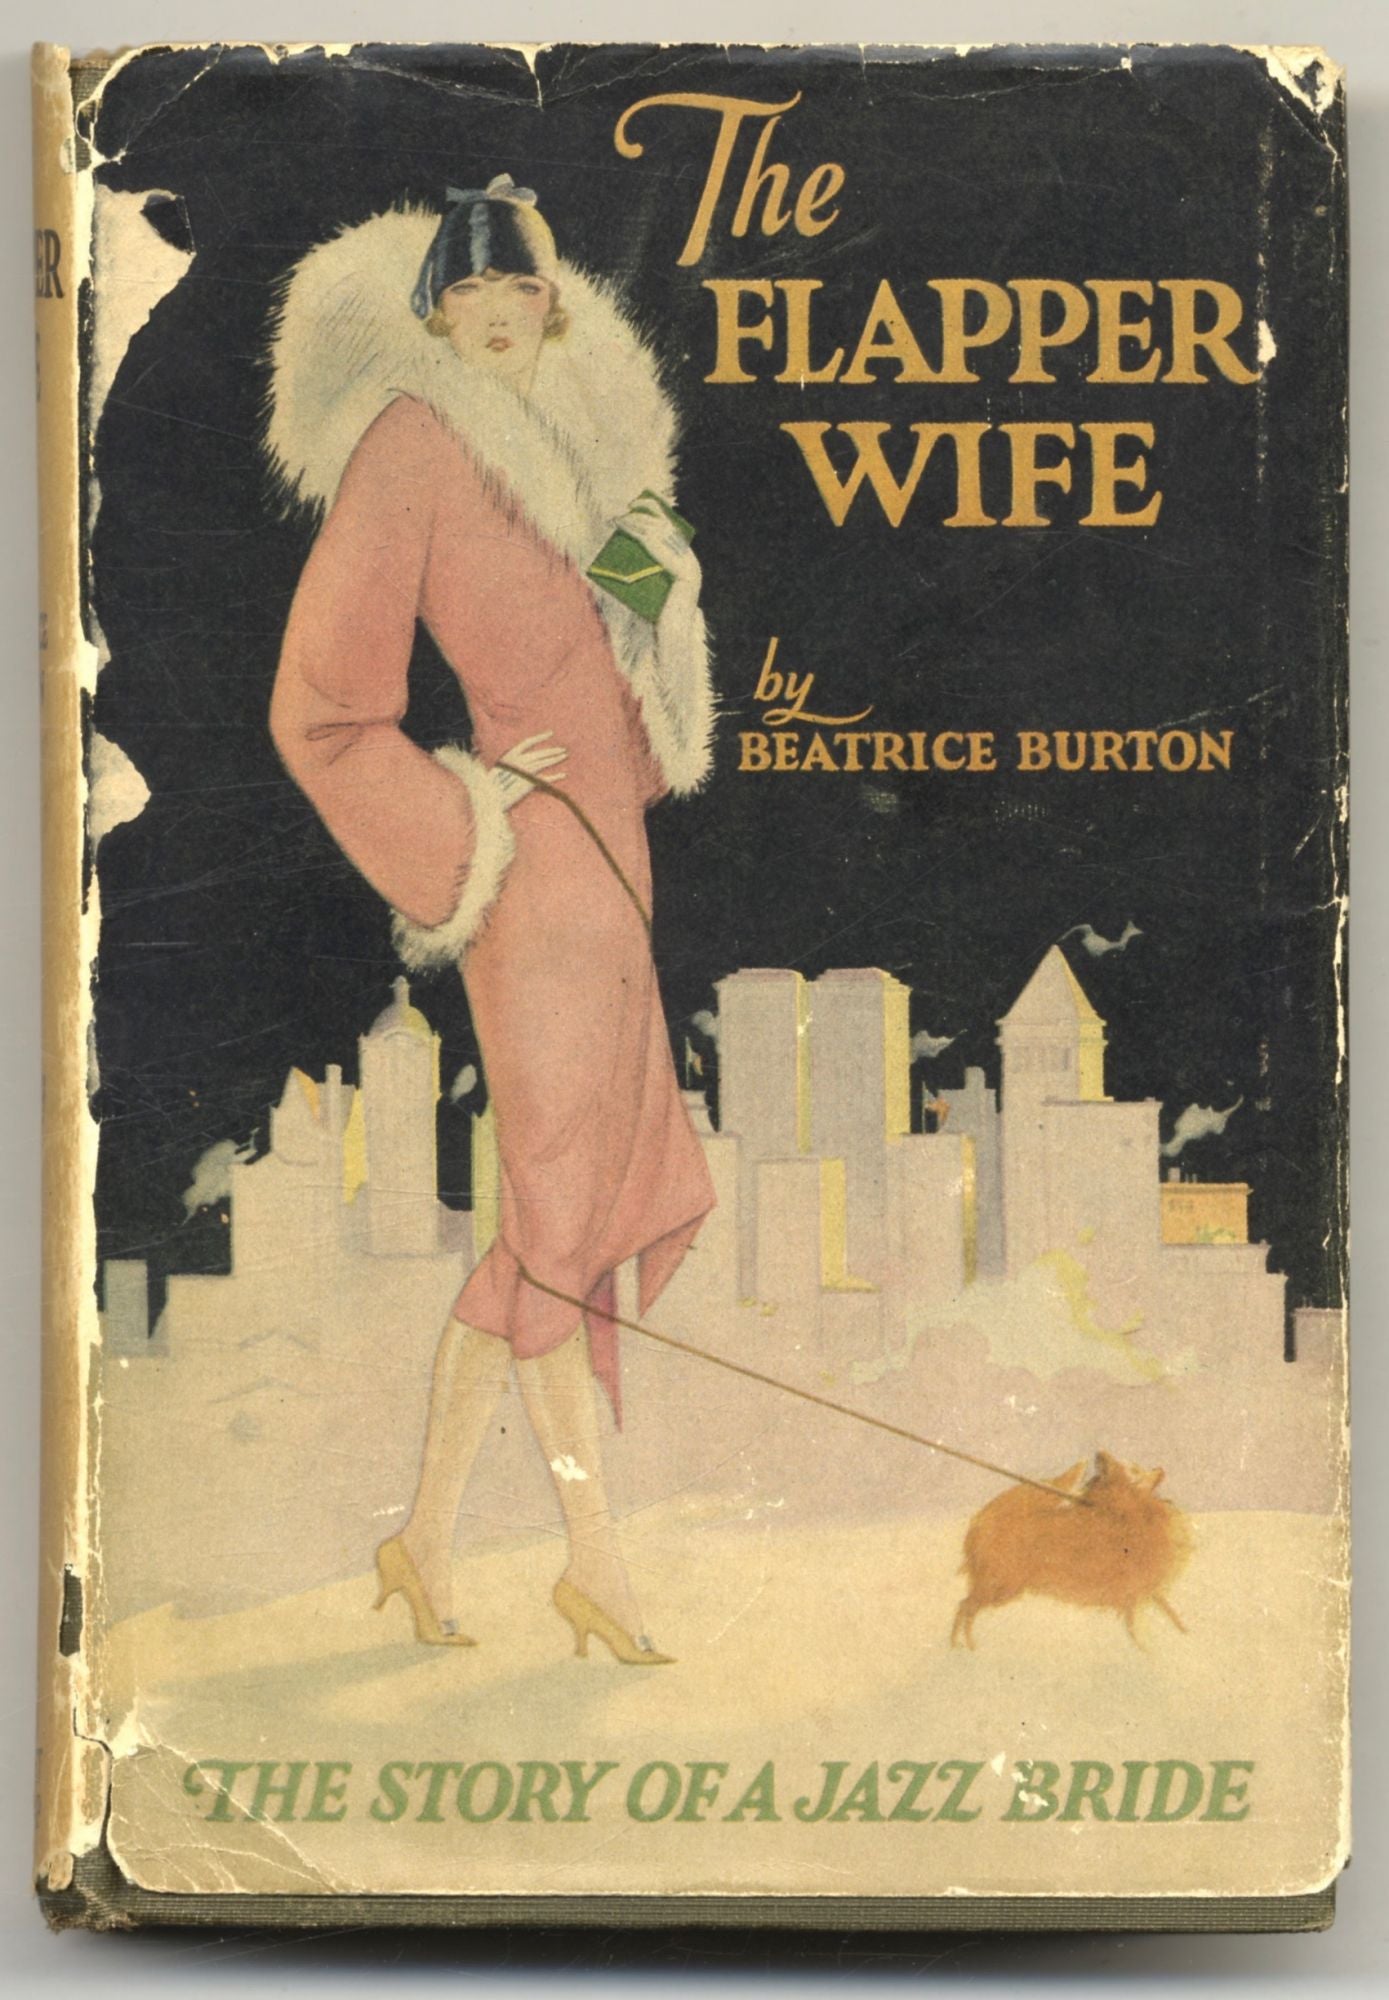 Book #26864 The Flapper Wife, The Story Of A Jazz Bride. Beatrice Burton, Morgan.